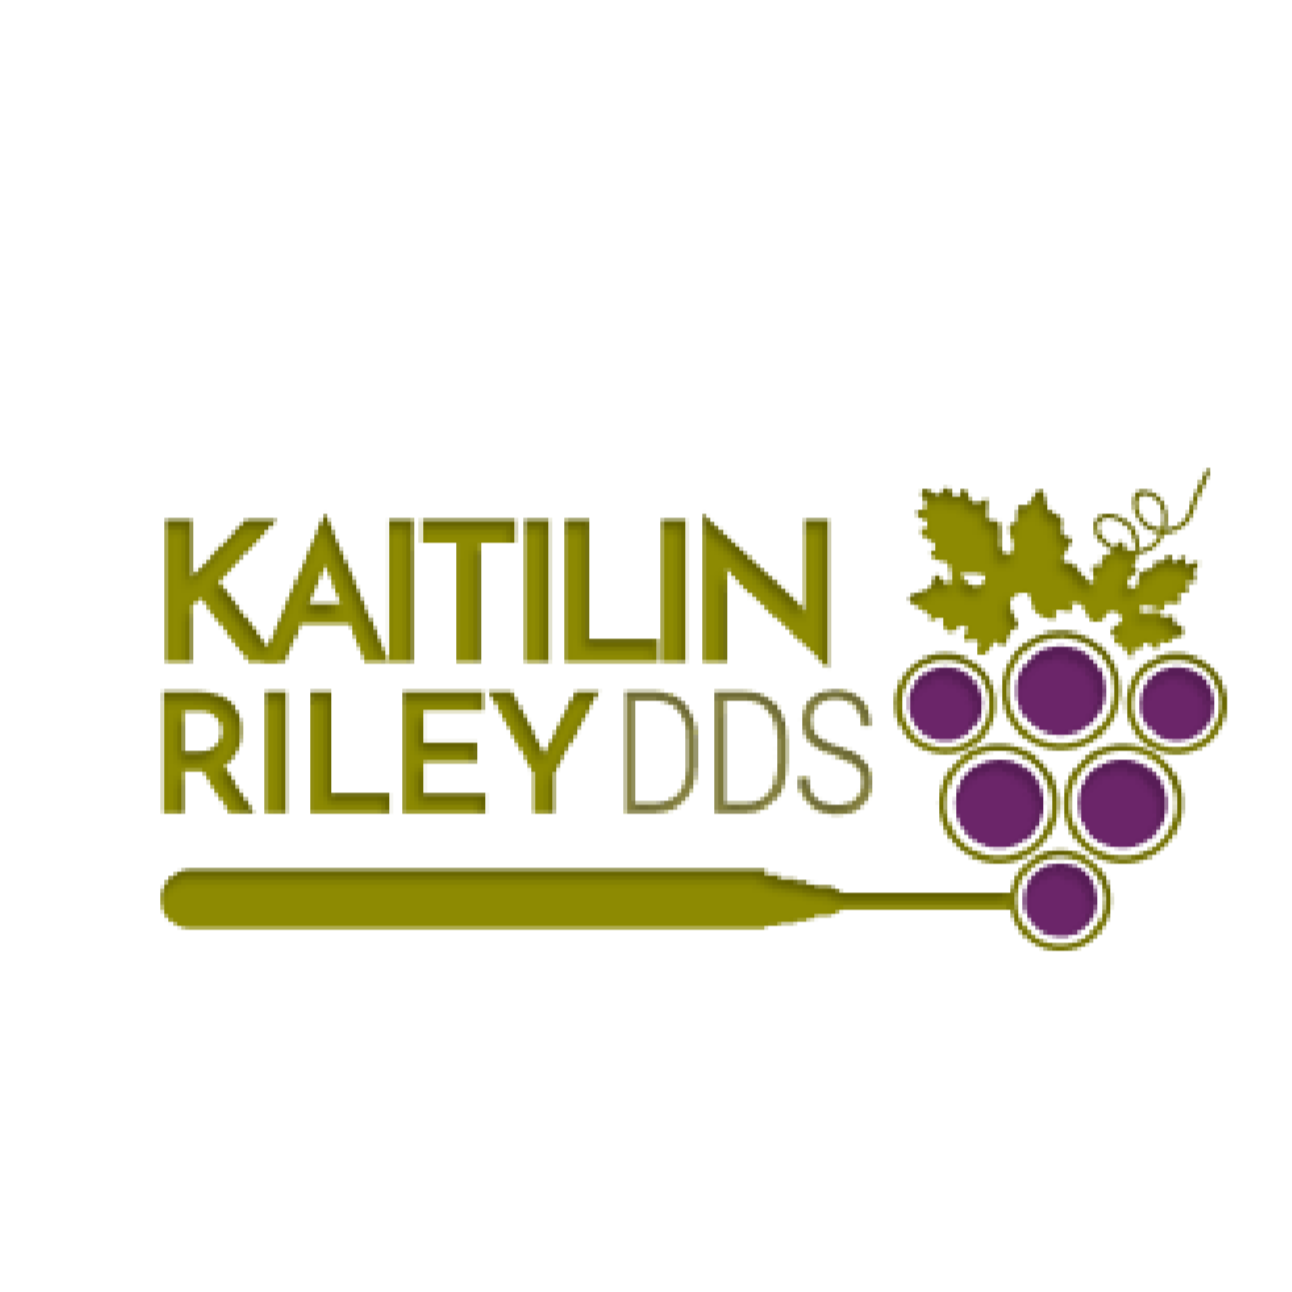 Kaitilin K Riley, DDS Paso Robles (805)238-3880